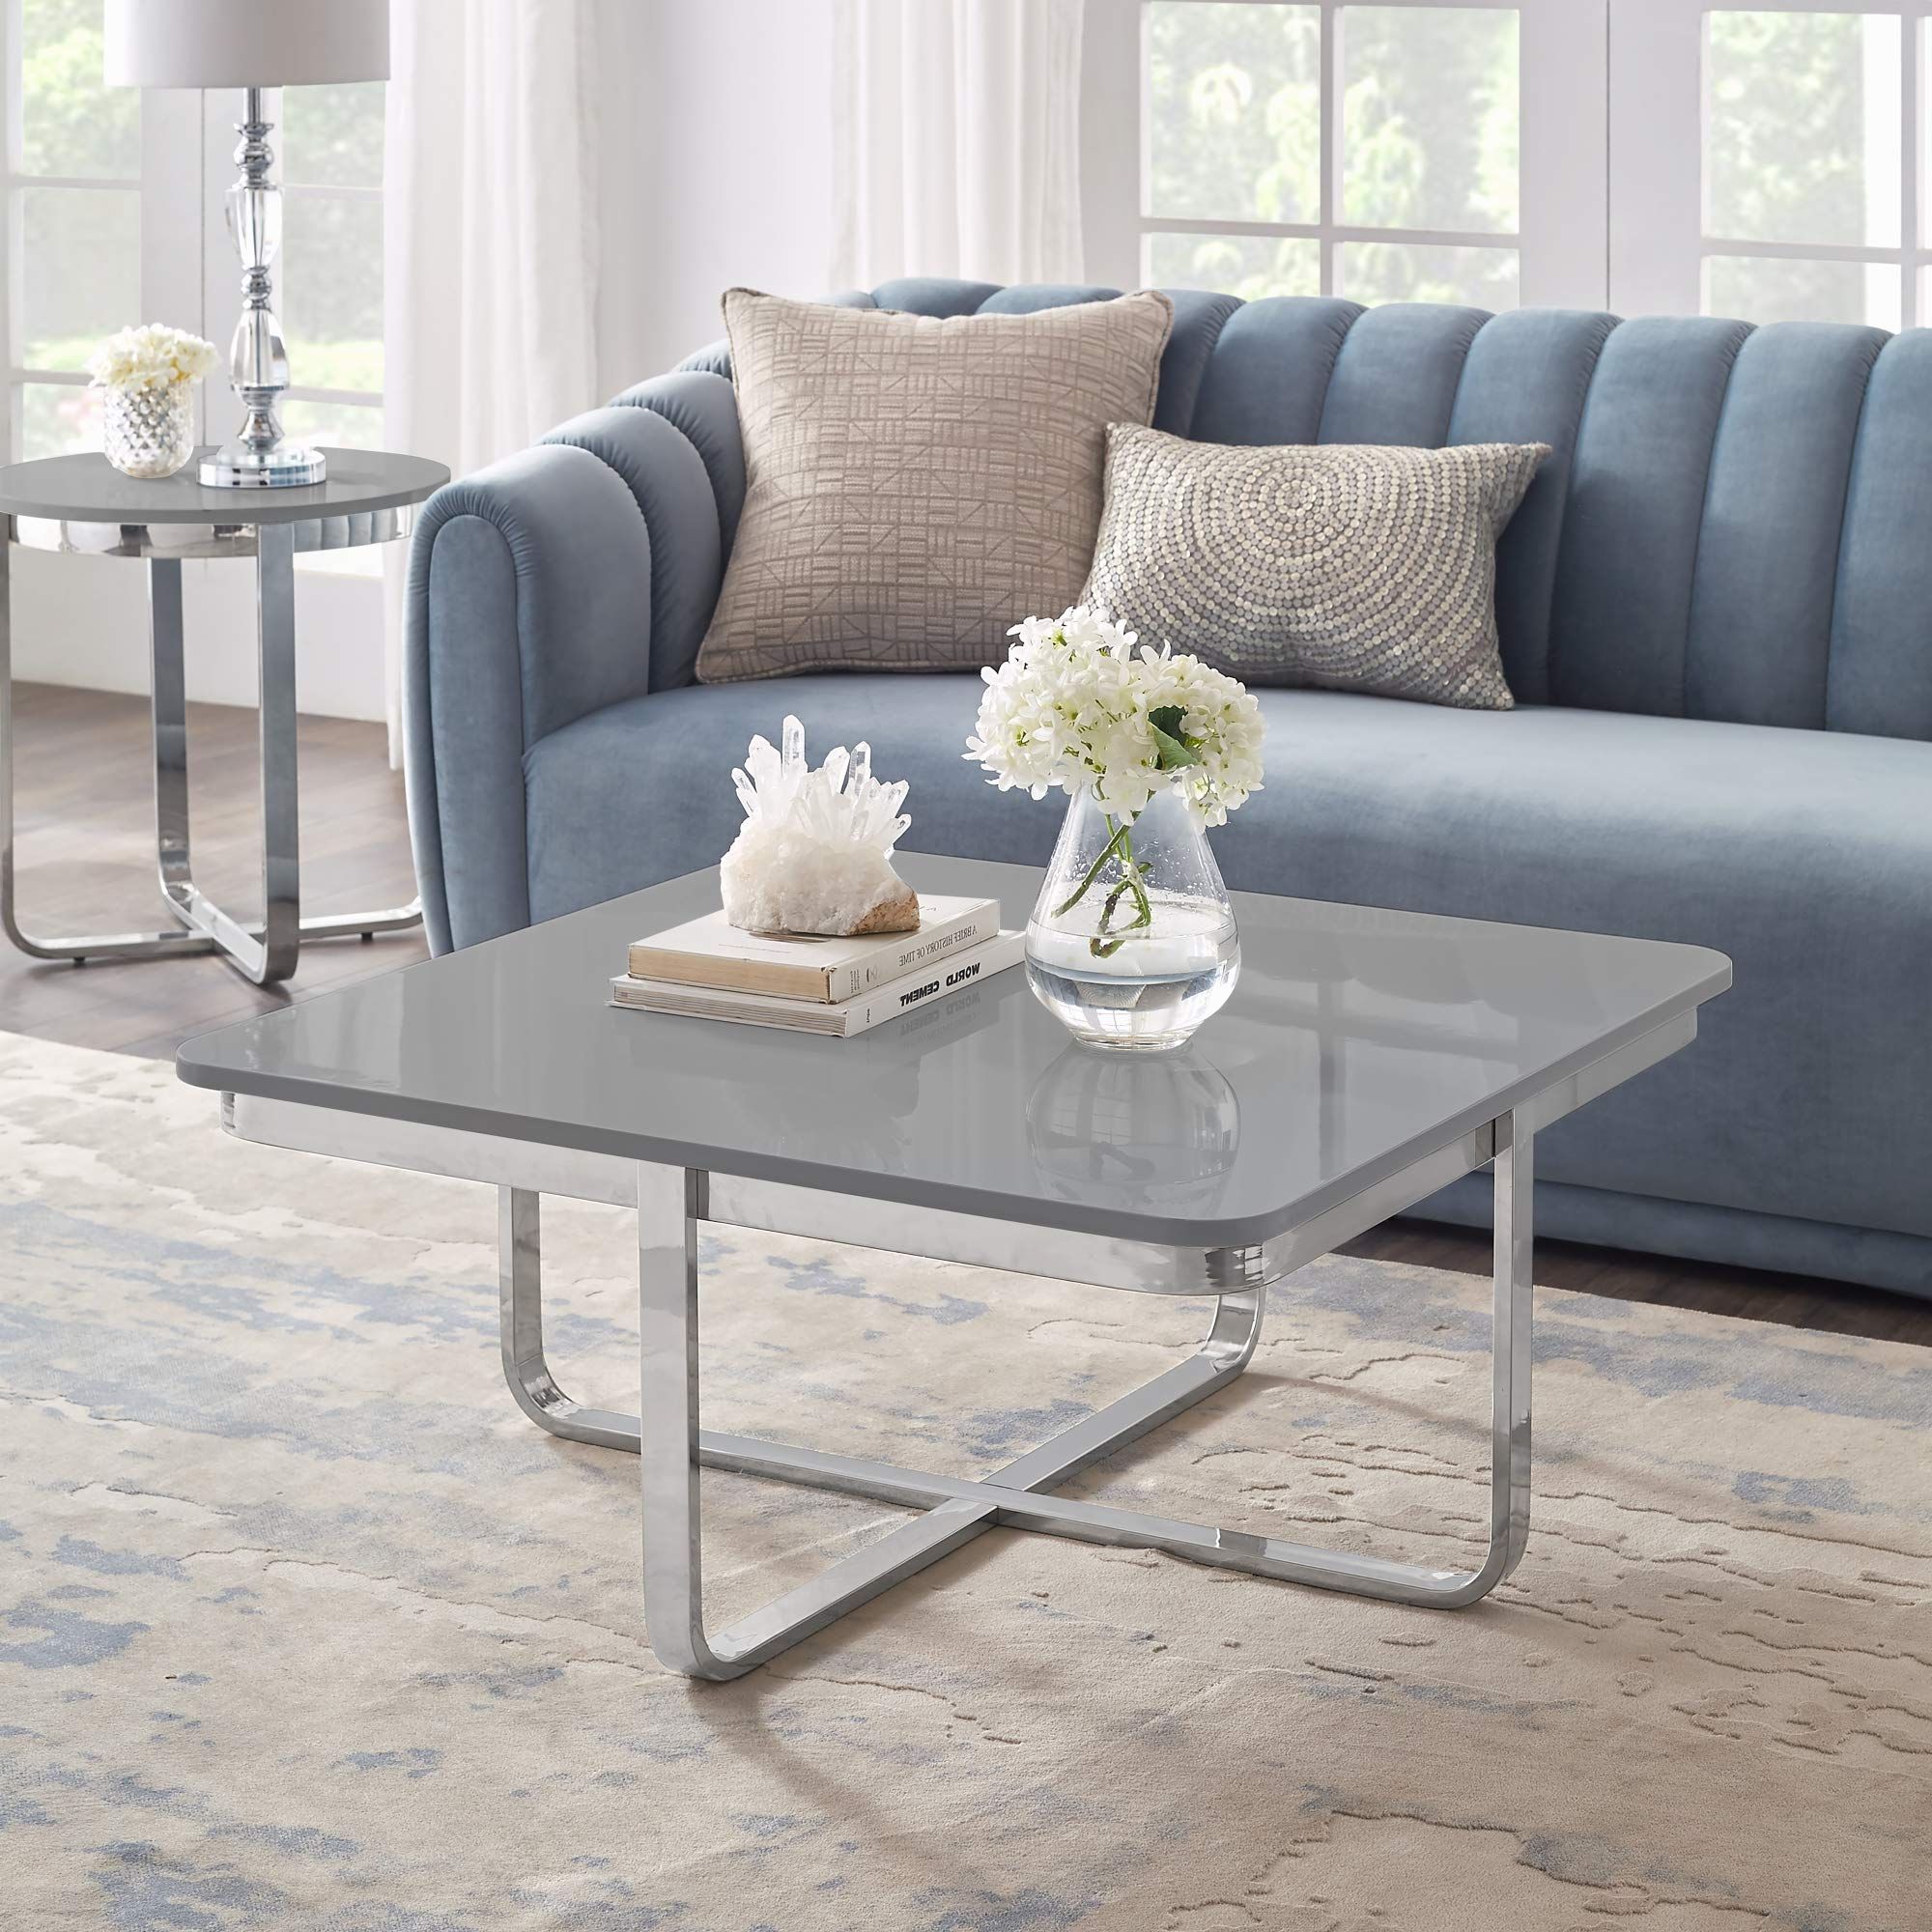 Most Popular Amazon: Inspire Home Square Coffee Table – High Gloss Lacquer Finish  Top Table For Living Room Polished Stainless Steel Base X Leg Latrice Light  Grey/chrome : Home & Kitchen Within Glossy Finished Metal Coffee Tables (View 2 of 10)